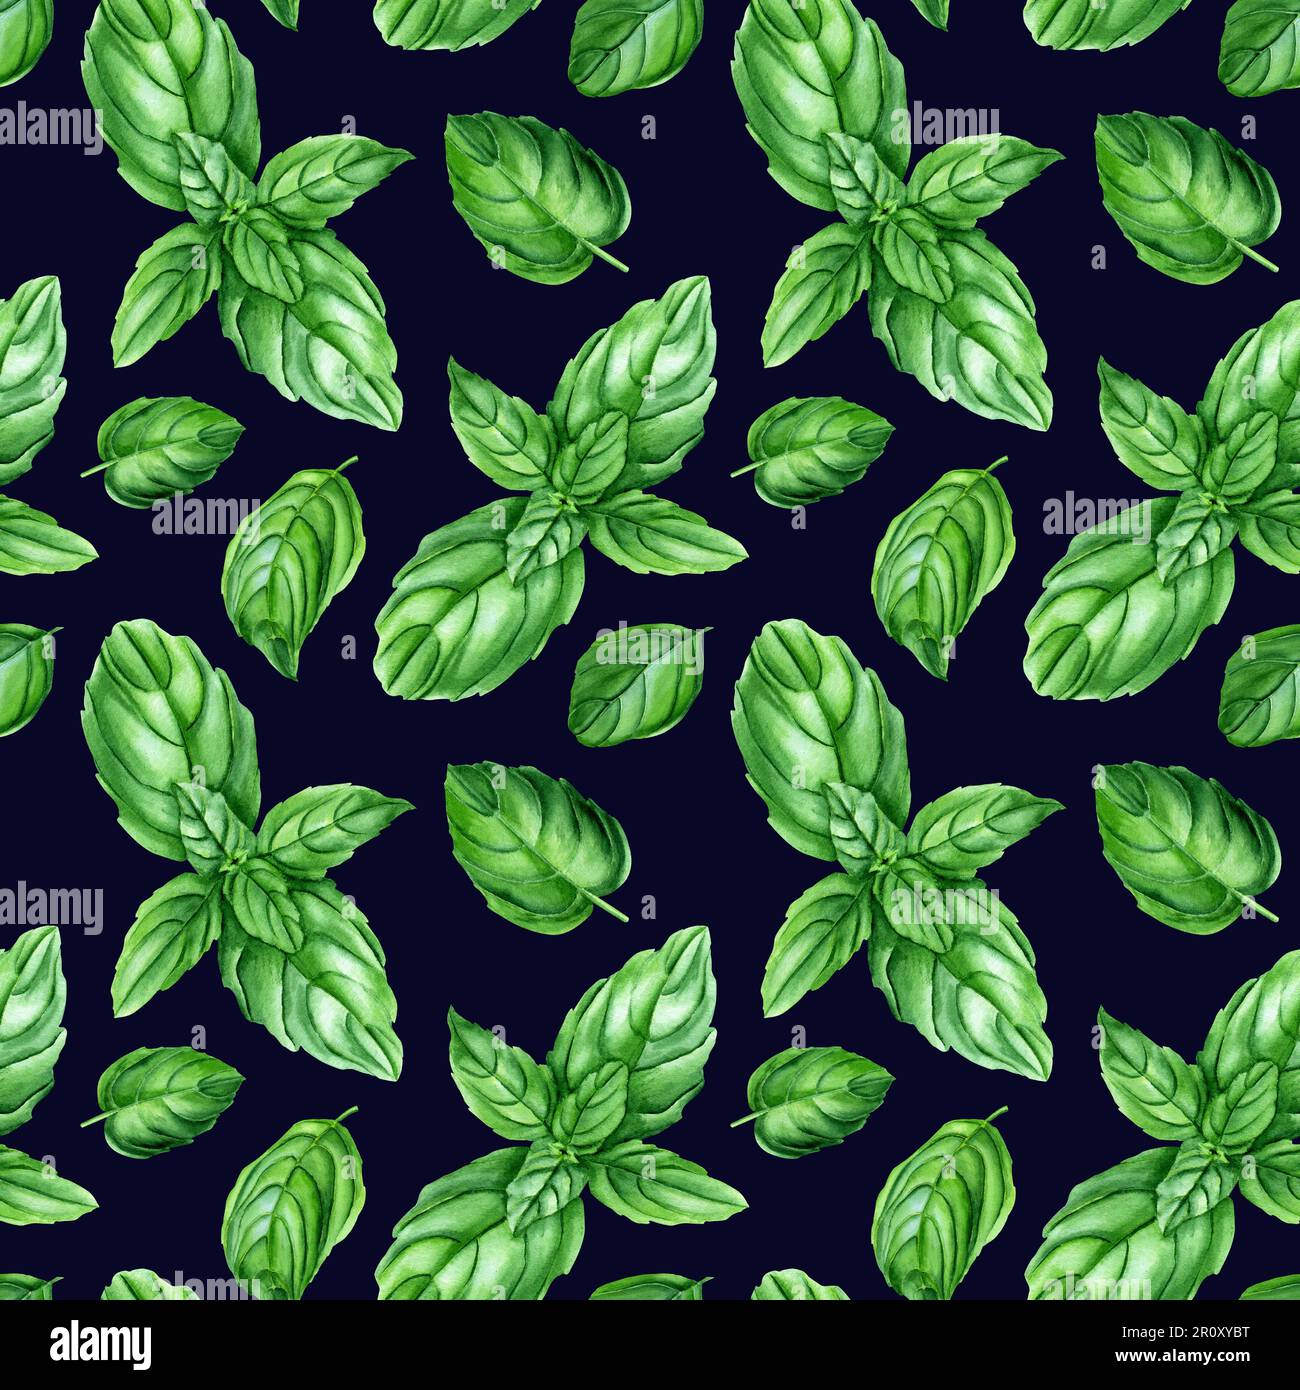 Watercolor seamless pattern with basil herb. Botanical illustration for wrapping, wallpaper, fabric Stock Photo